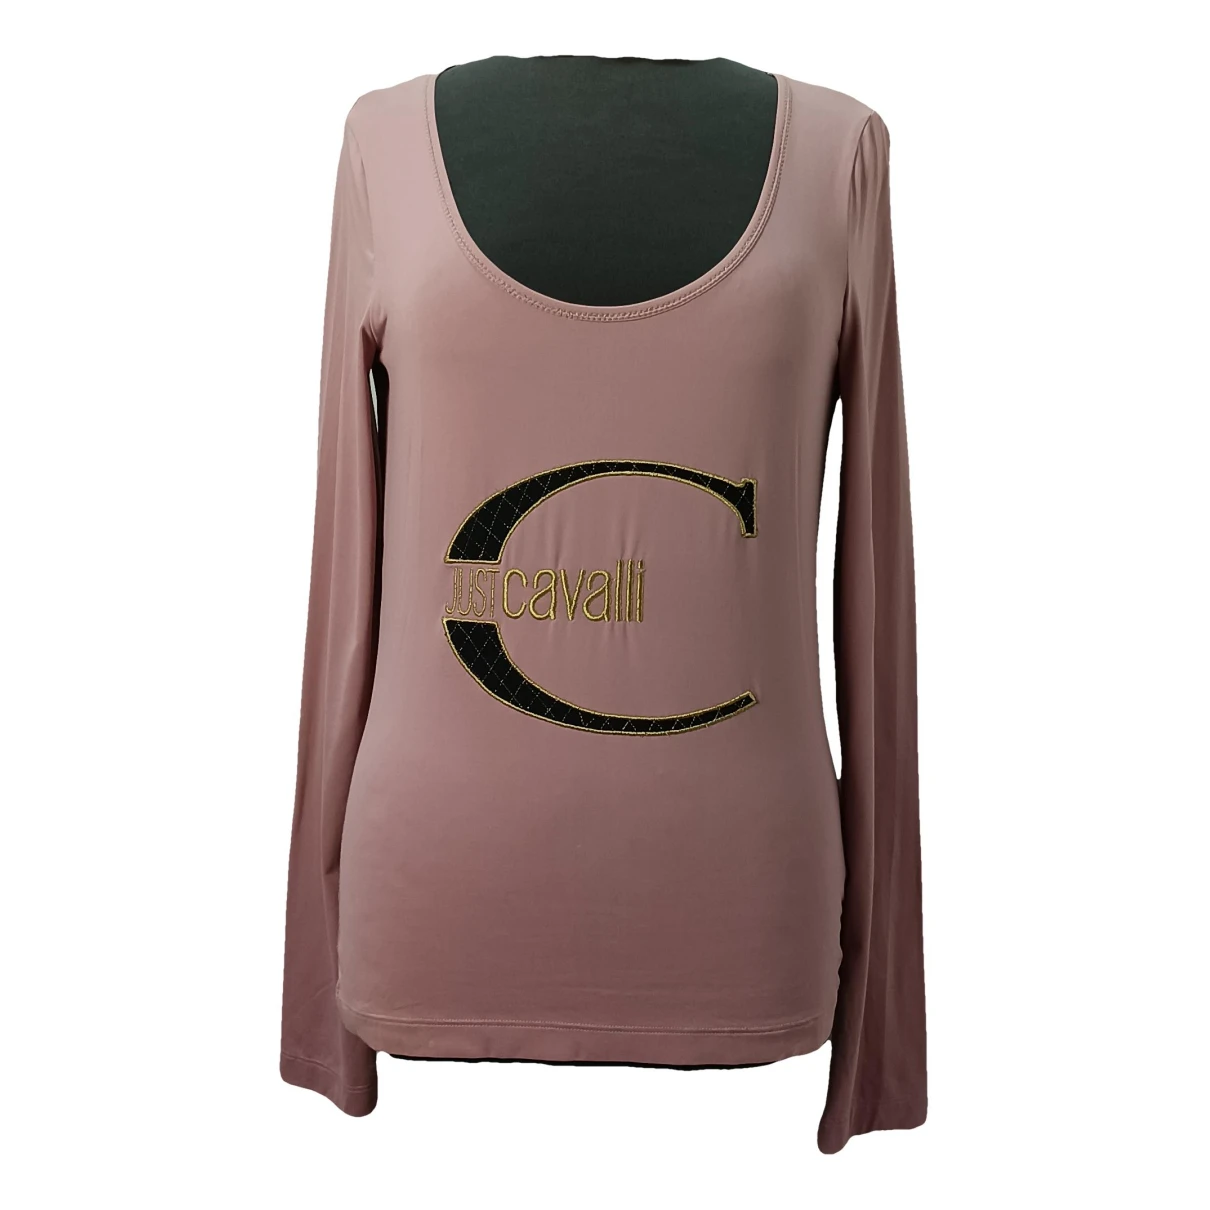 Pre-owned Just Cavalli T-shirt In Pink